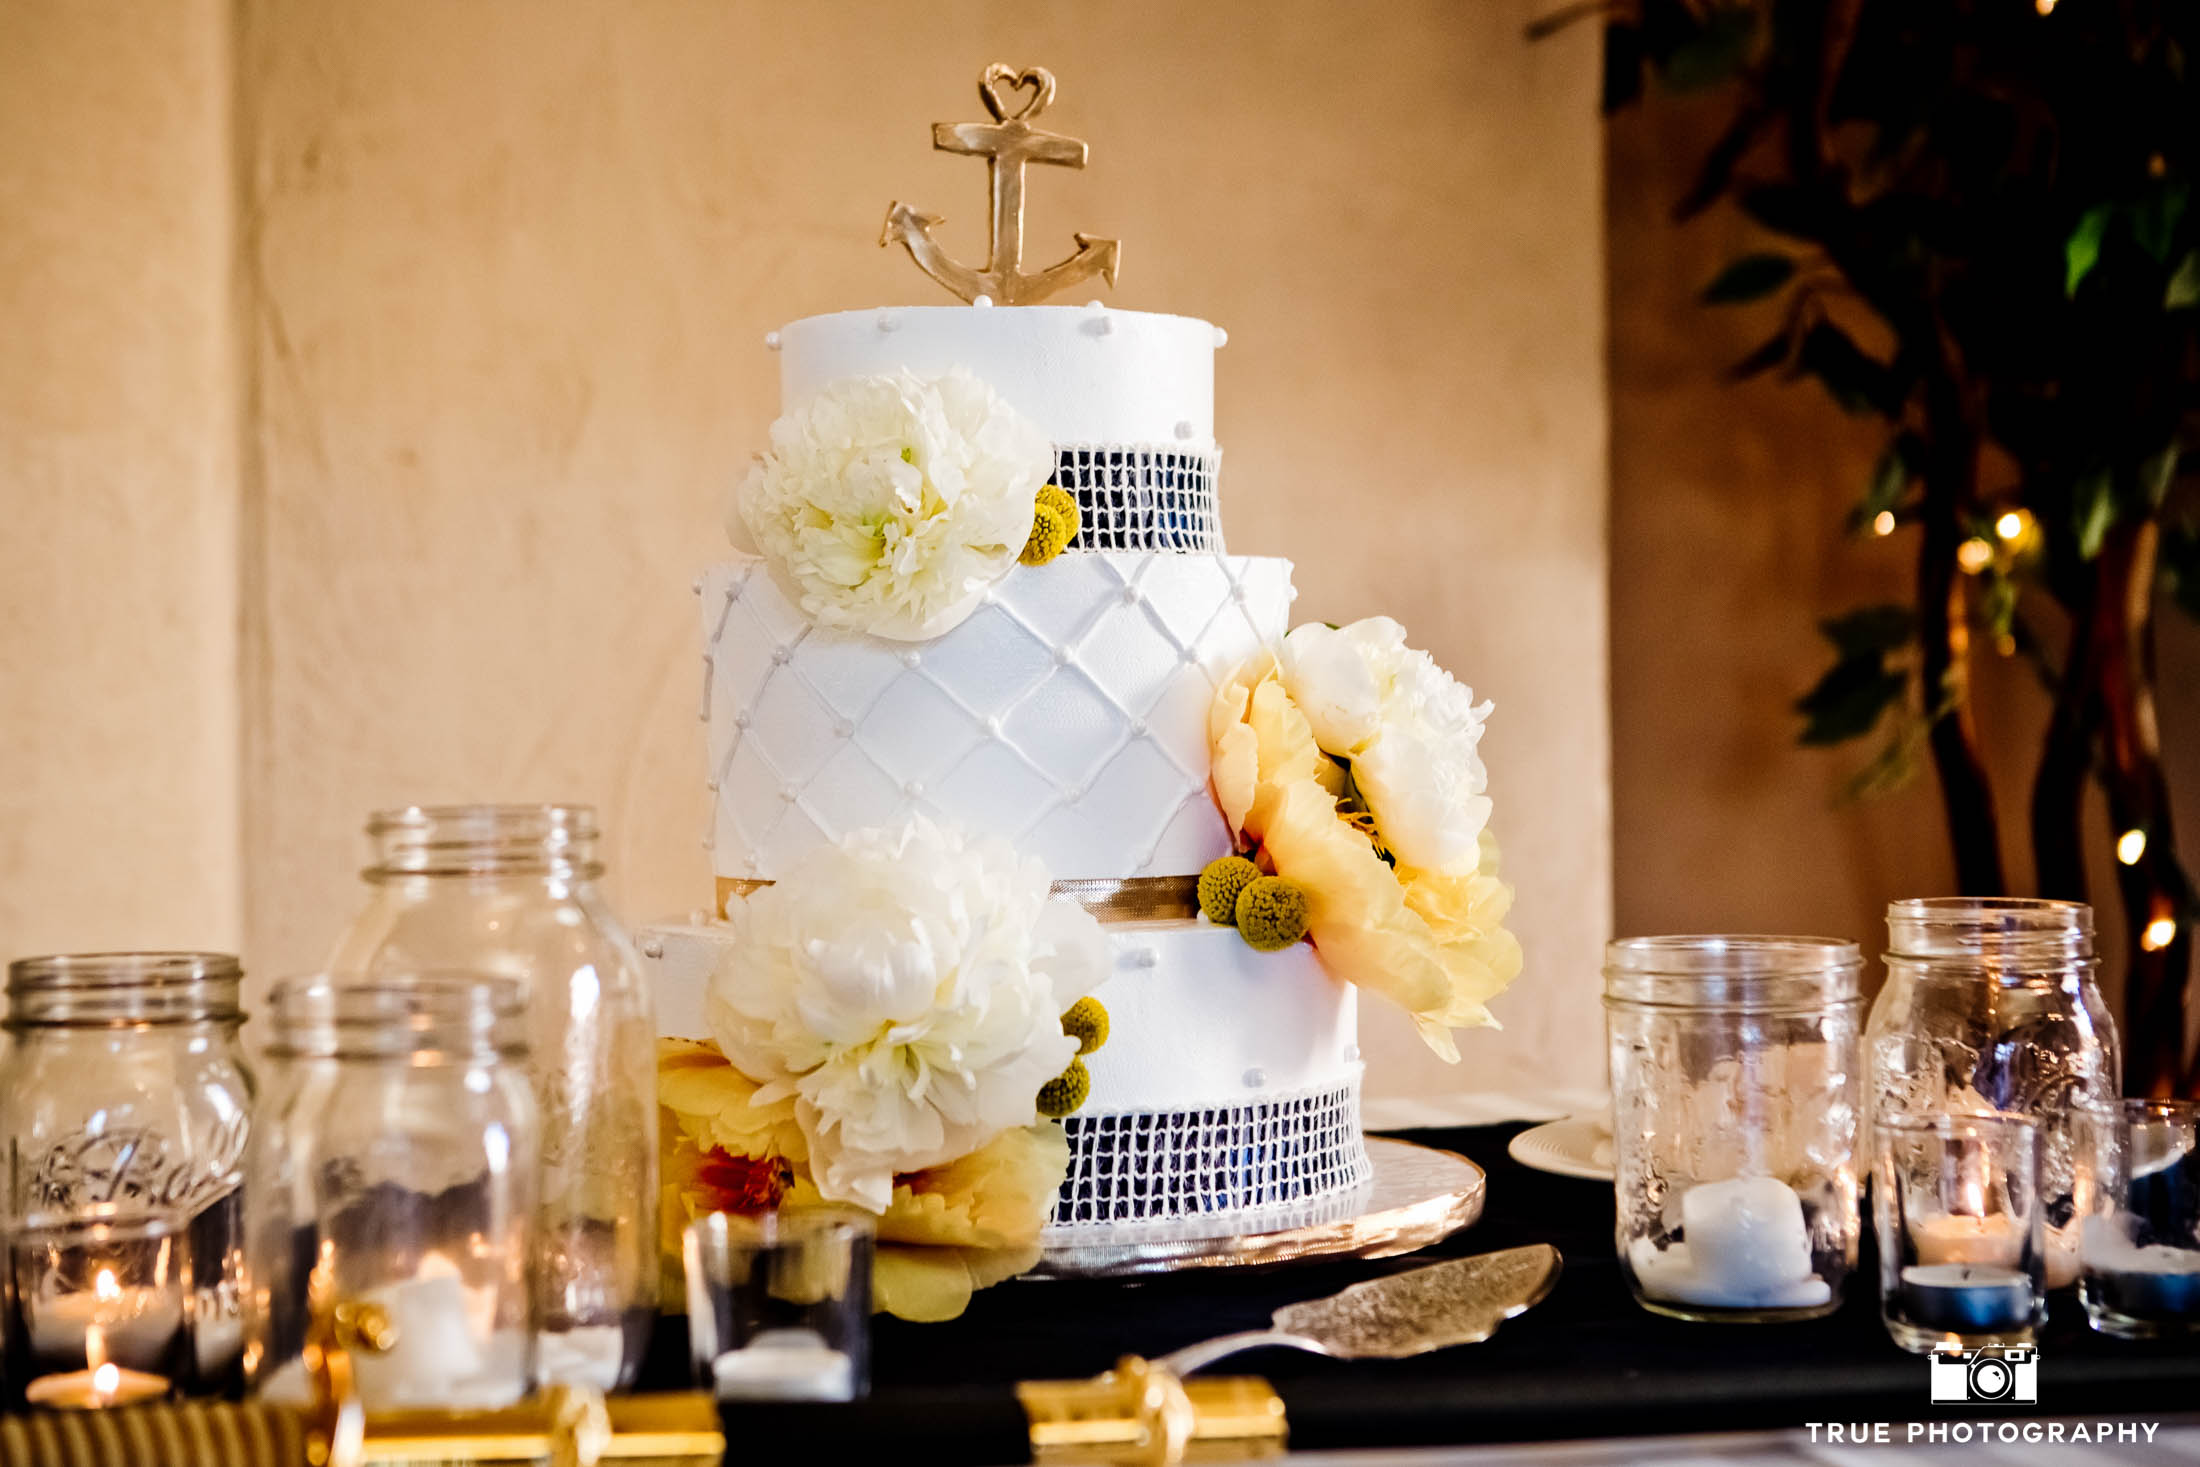 Classic wedding cake decorated with sailor wedding cake topper